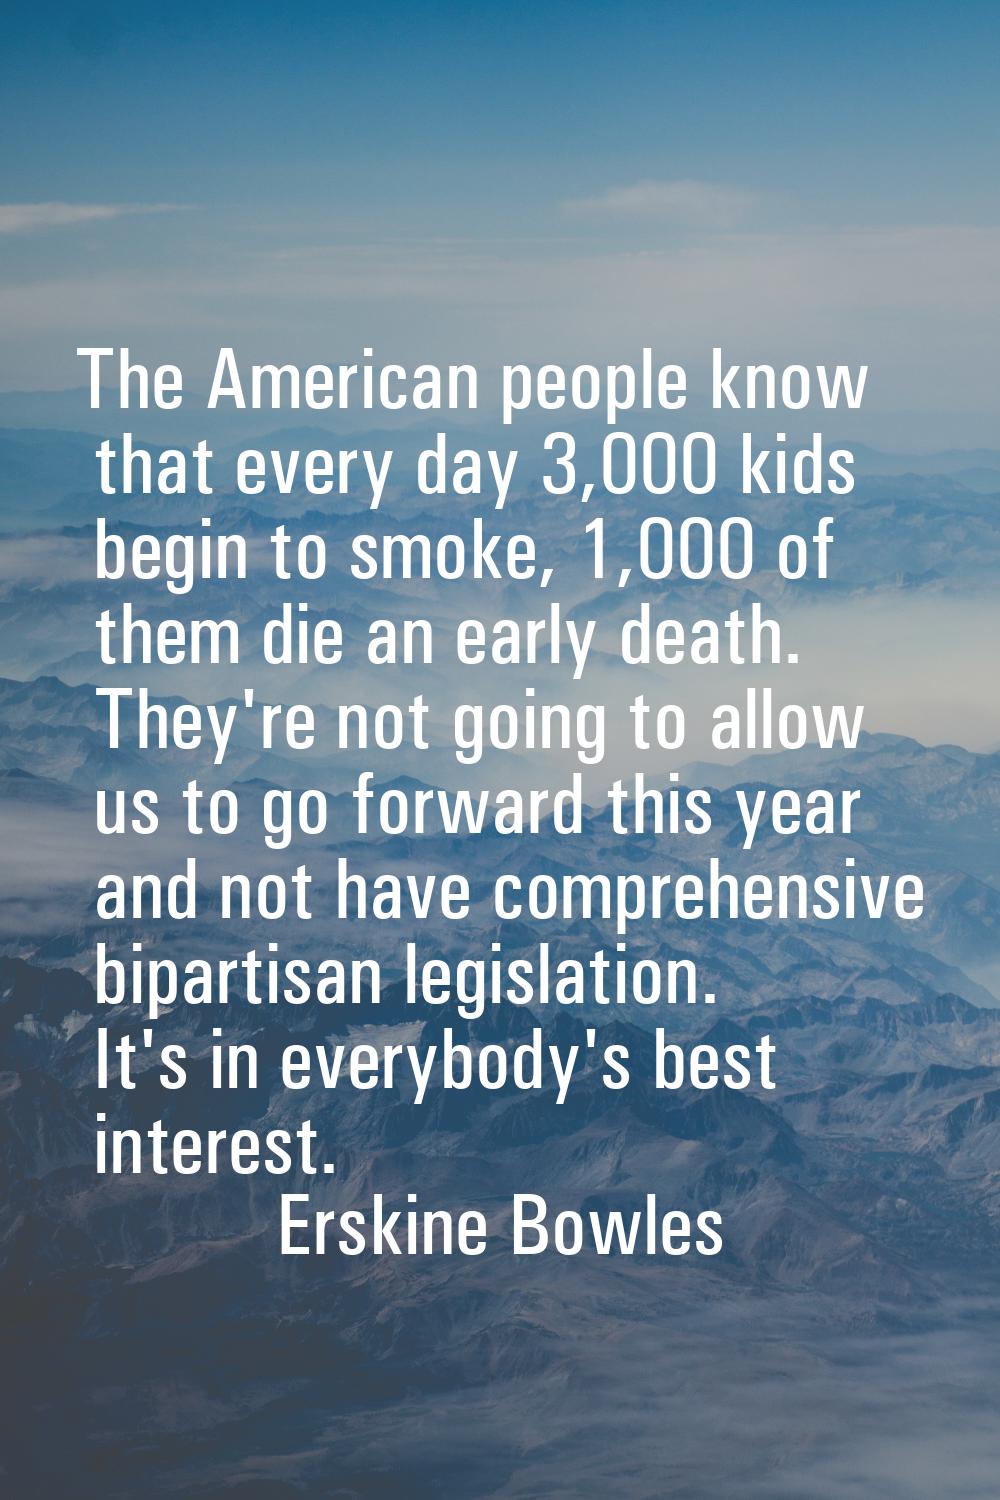 The American people know that every day 3,000 kids begin to smoke, 1,000 of them die an early death